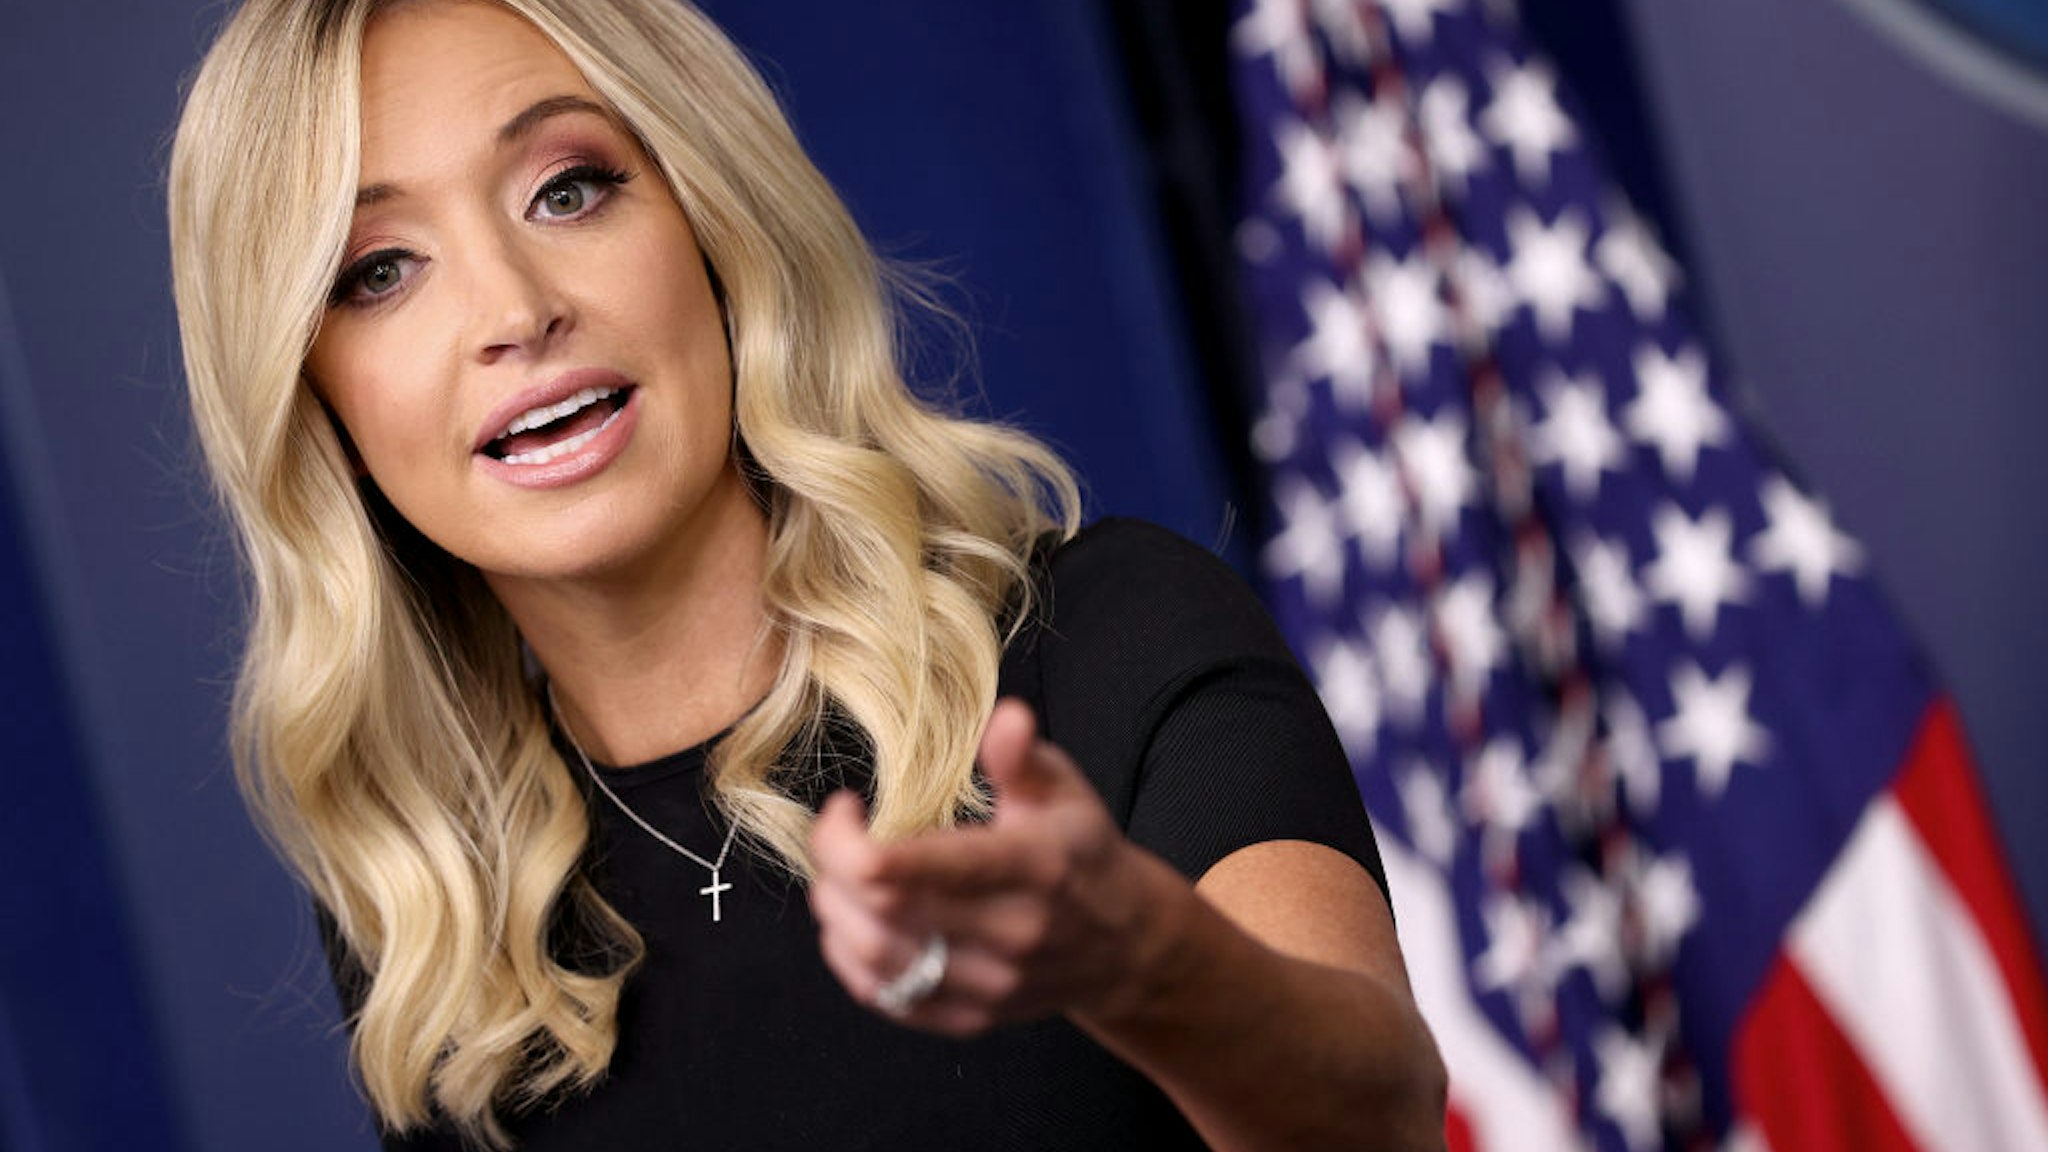 WASHINGTON, DC - MAY 26: White House press secretary Kayleigh McEnany answers questions during the daily briefing at the White House on May 26, 2020 in Washington, DC. McEnany answered a range of questions related primarily to the COVID-19 pandemic. (Photo by Win McNamee/Getty Images)